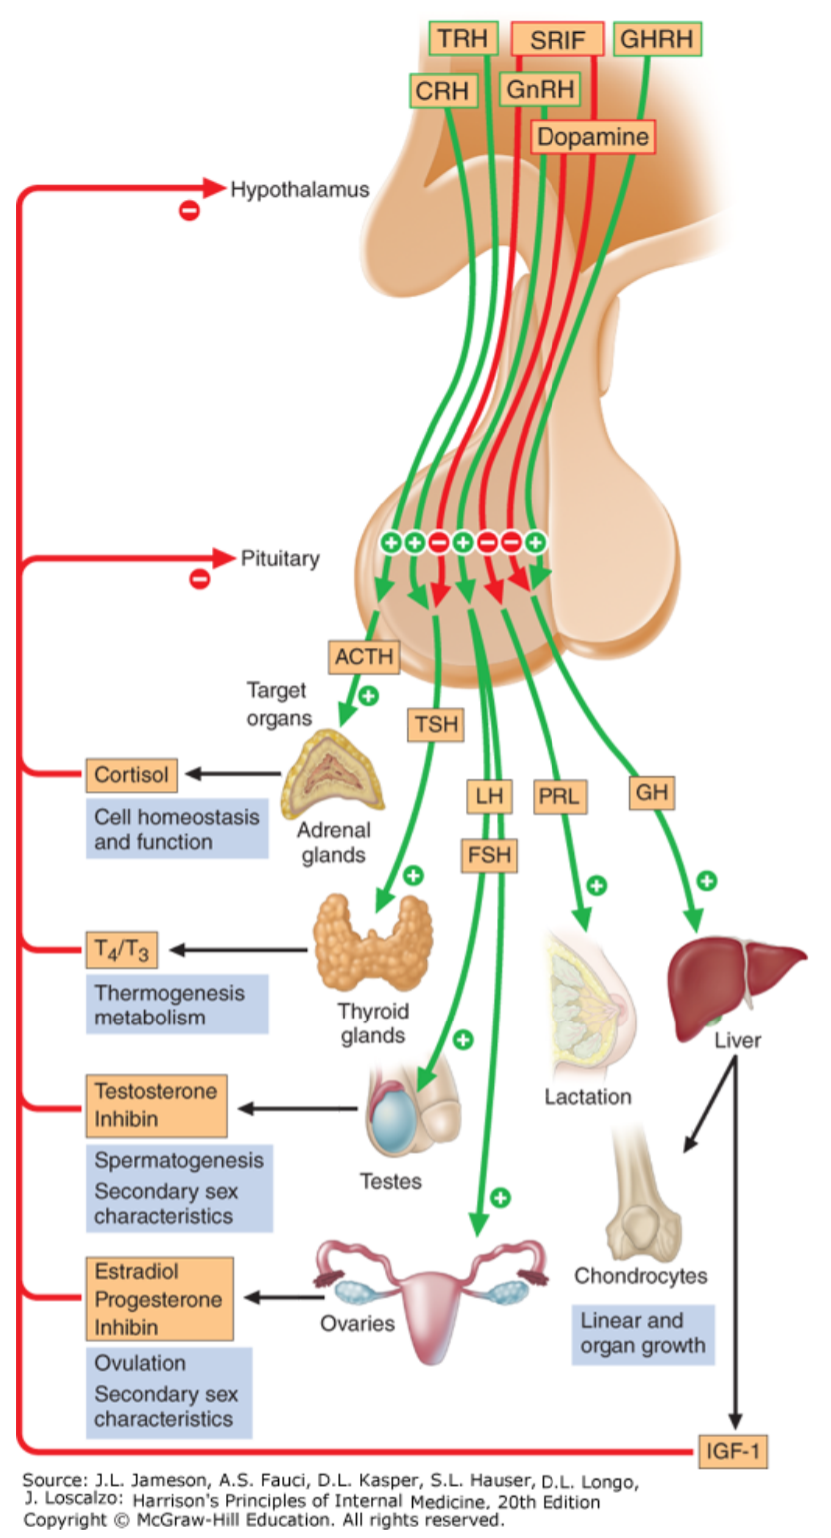 55. Disorders of the hypothalamo-pituitary system. Pituitary